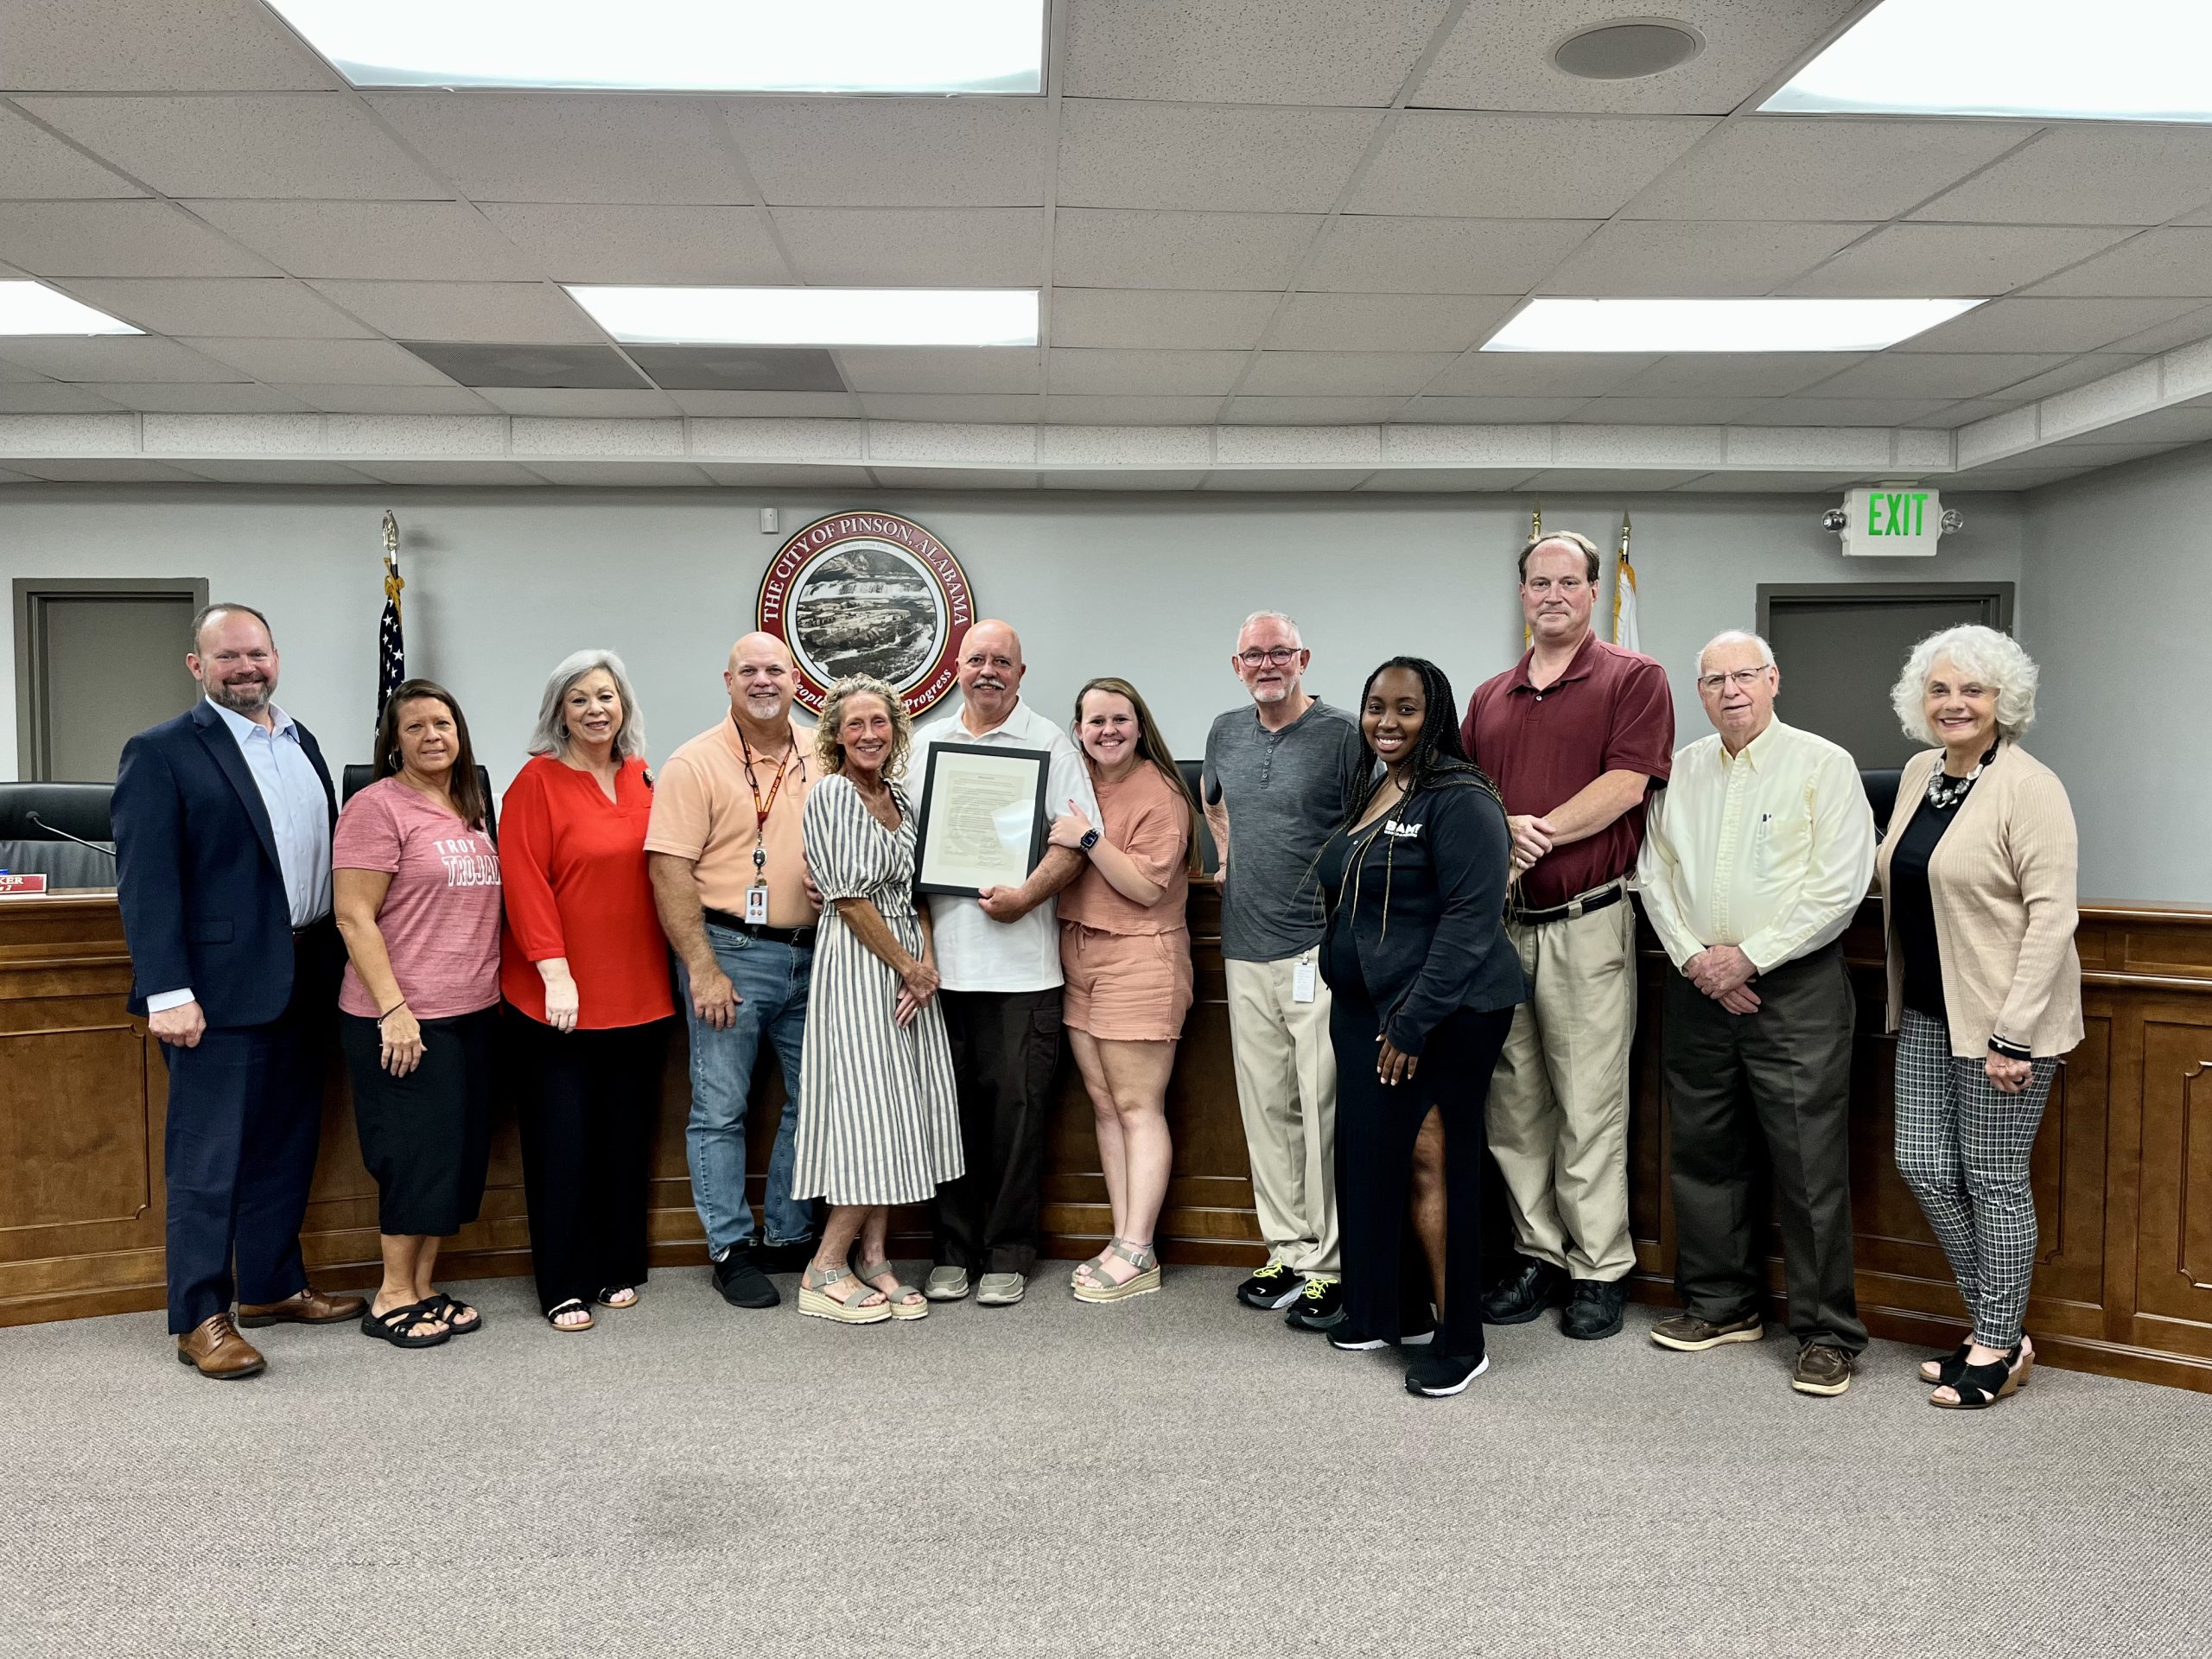 Pinson Zoning Official/Public Safety Director Bob Jones retires, is honored by Pinson Council